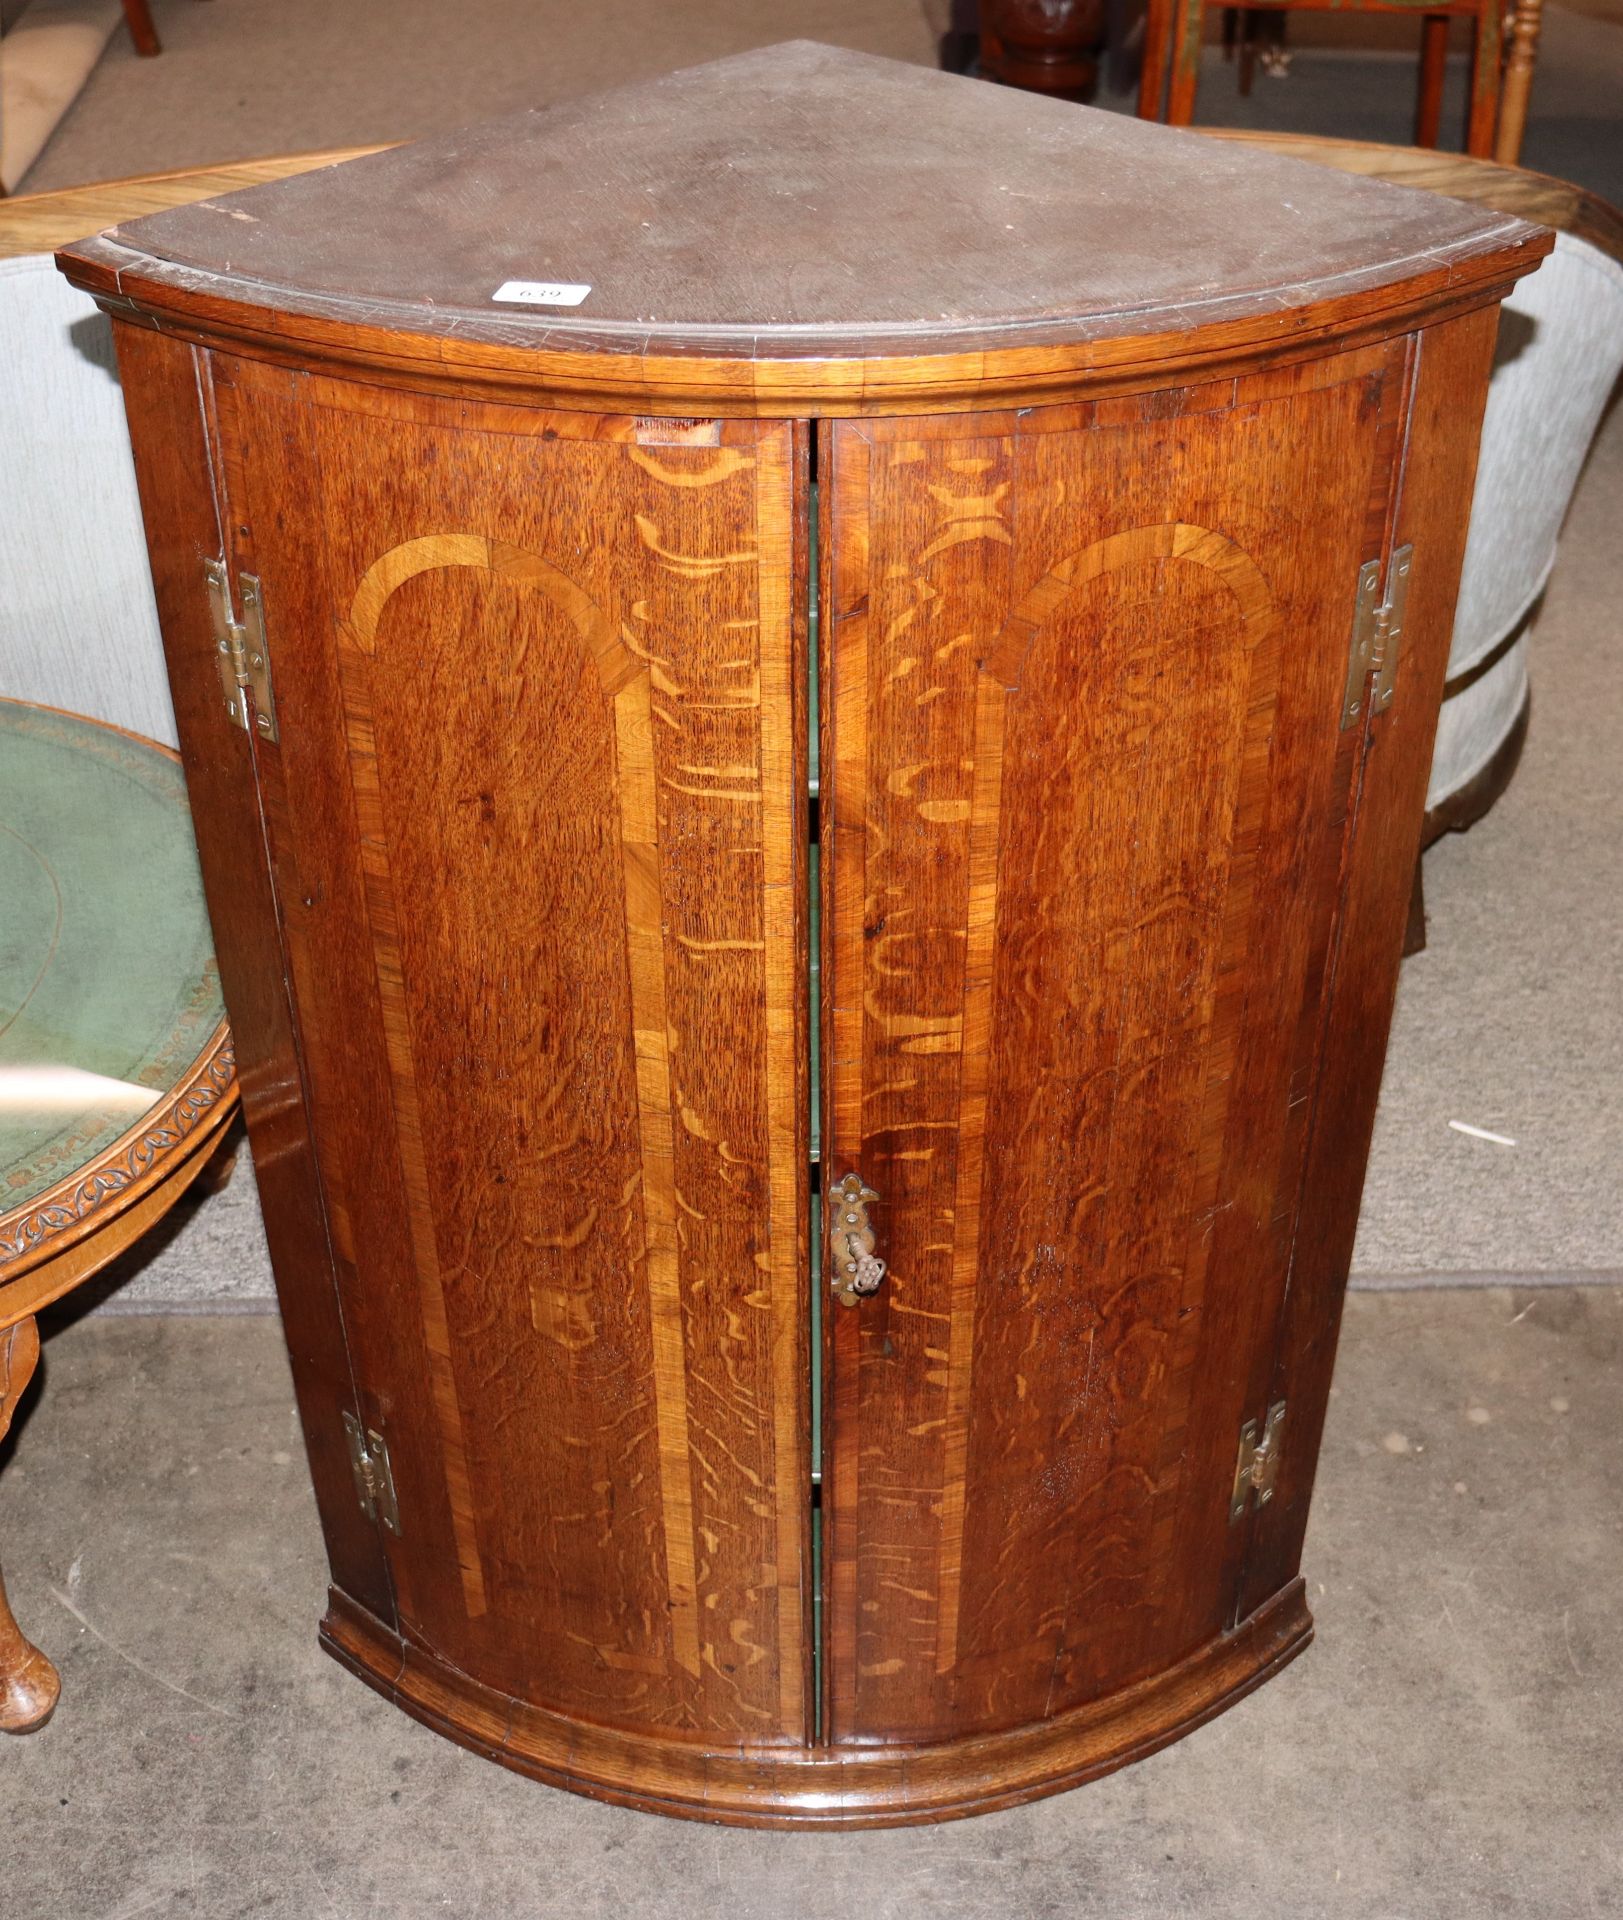 A 19th Century oak and mahogany cross banded elliptical hanging corner cupboard, the shaped interior